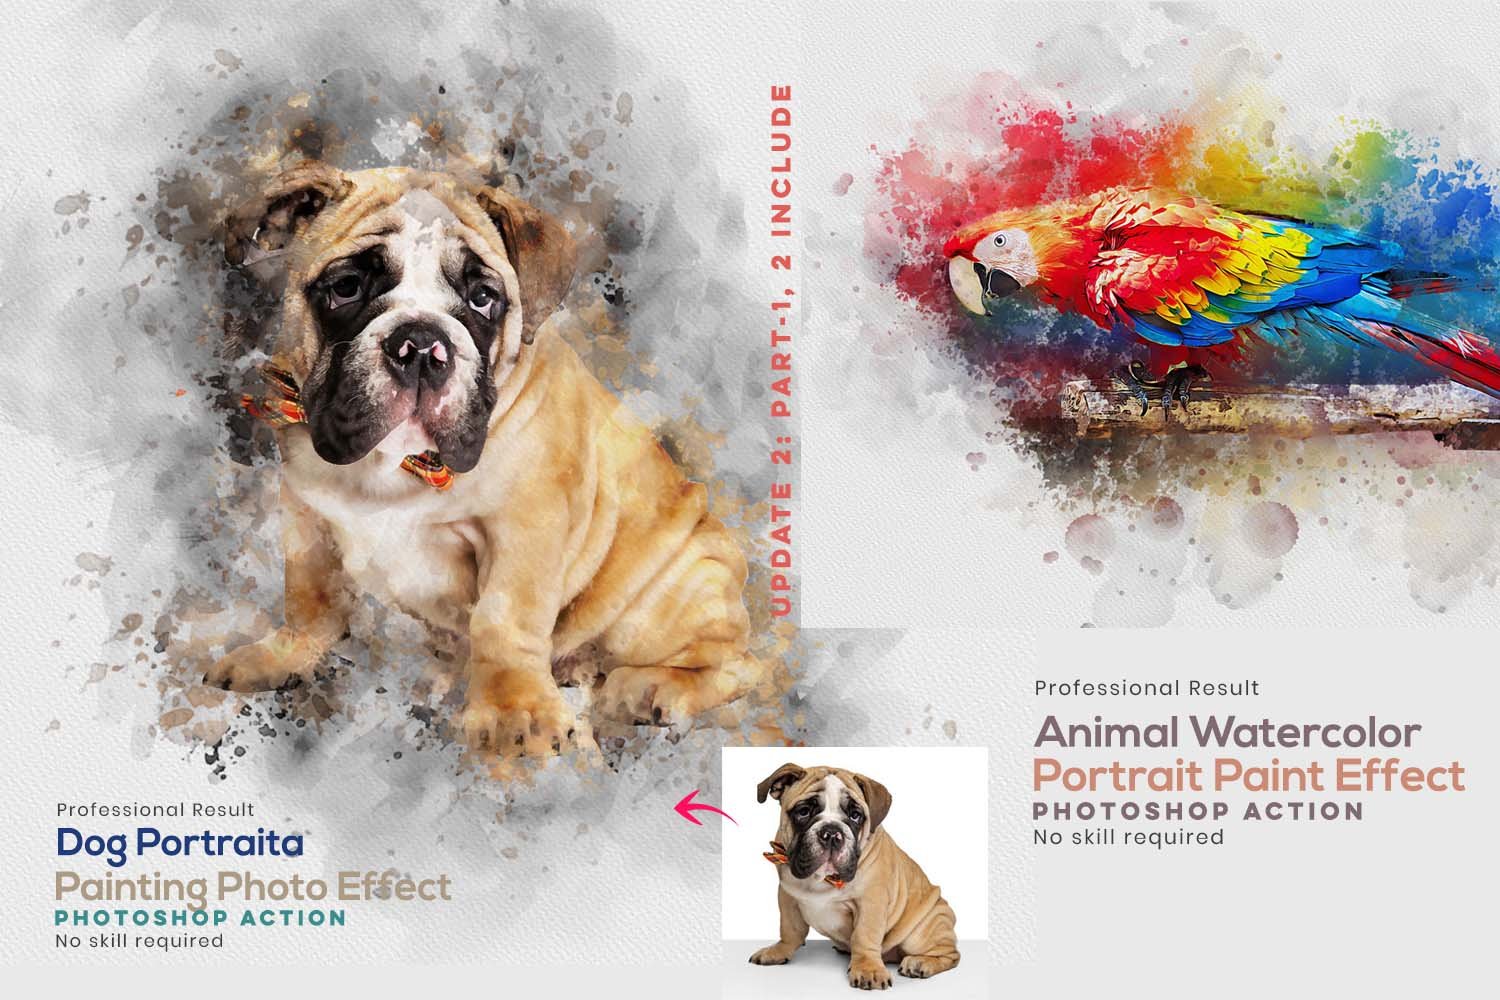 Dog Watercolor Paintingcover image.